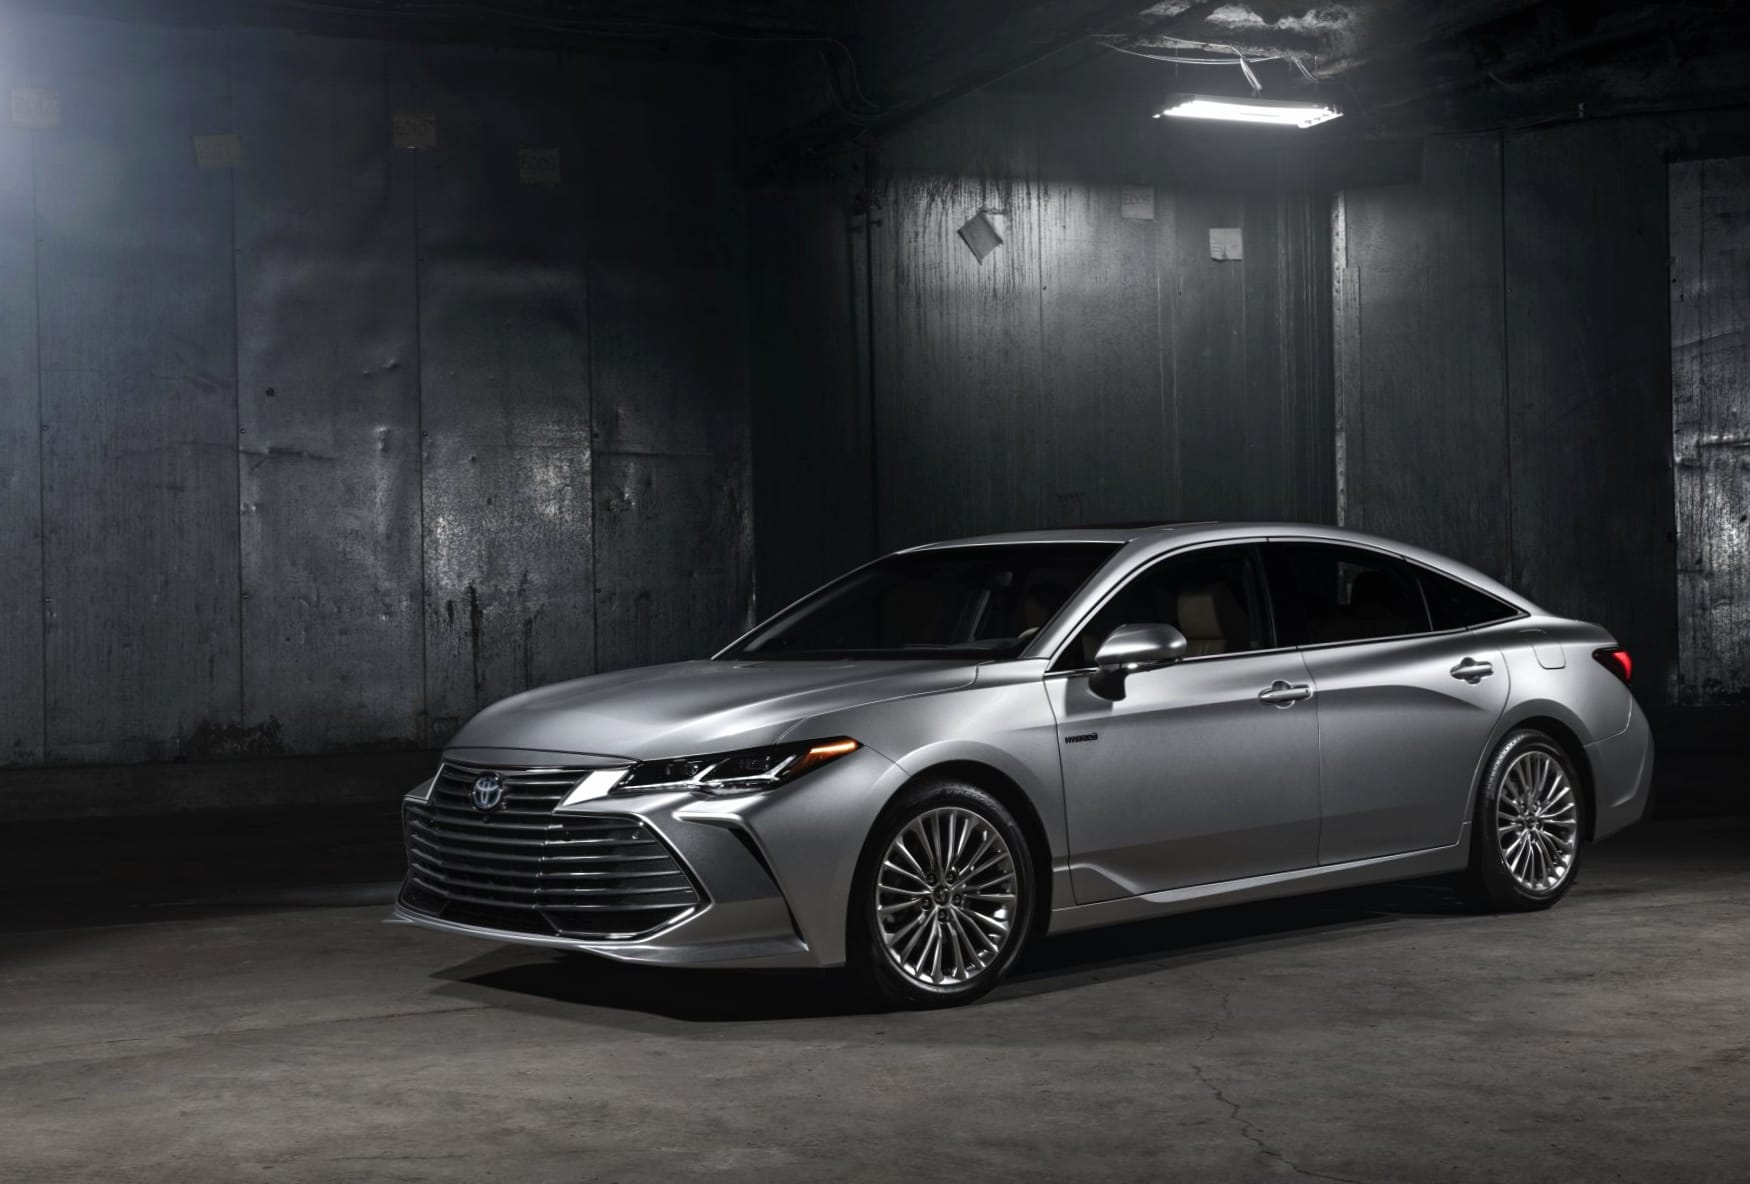 Toyota Avalon wallpapers HD quality